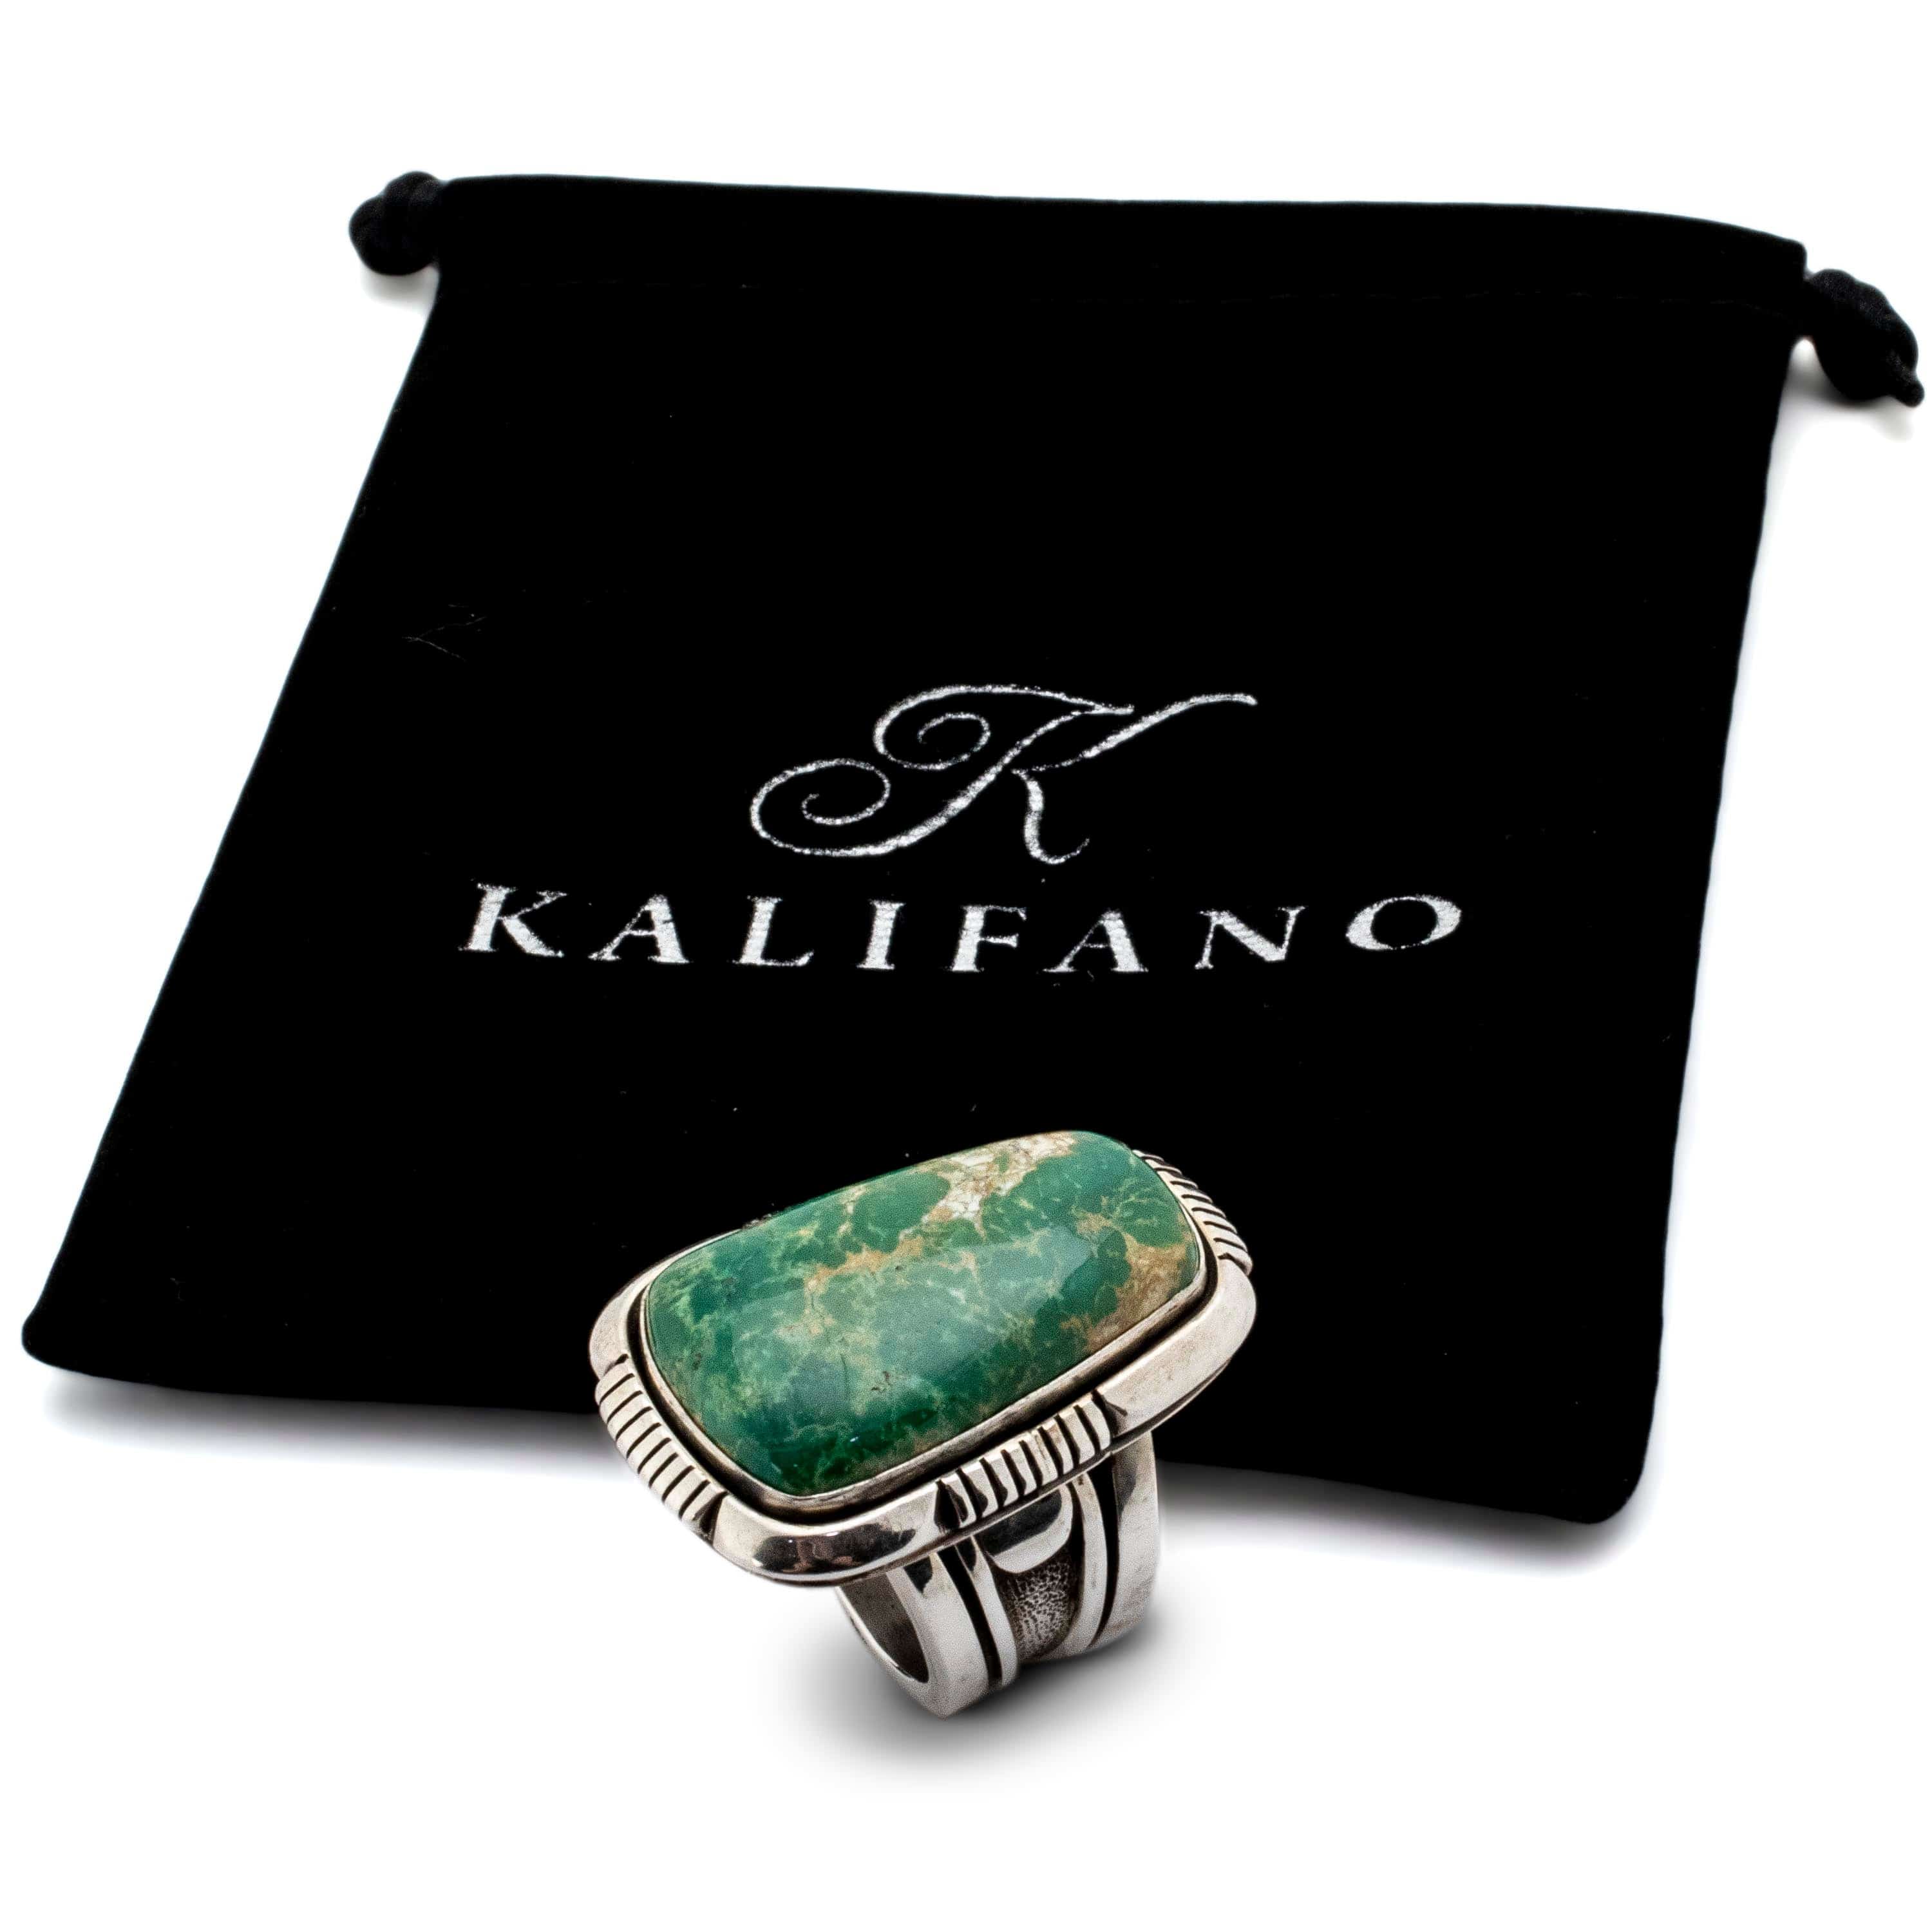 Kalifano Native American Jewelry 9 Cody Willie Tyrone Turquoise USA Native American Made 925 Sterling Silver Ring NAR1800.004.9